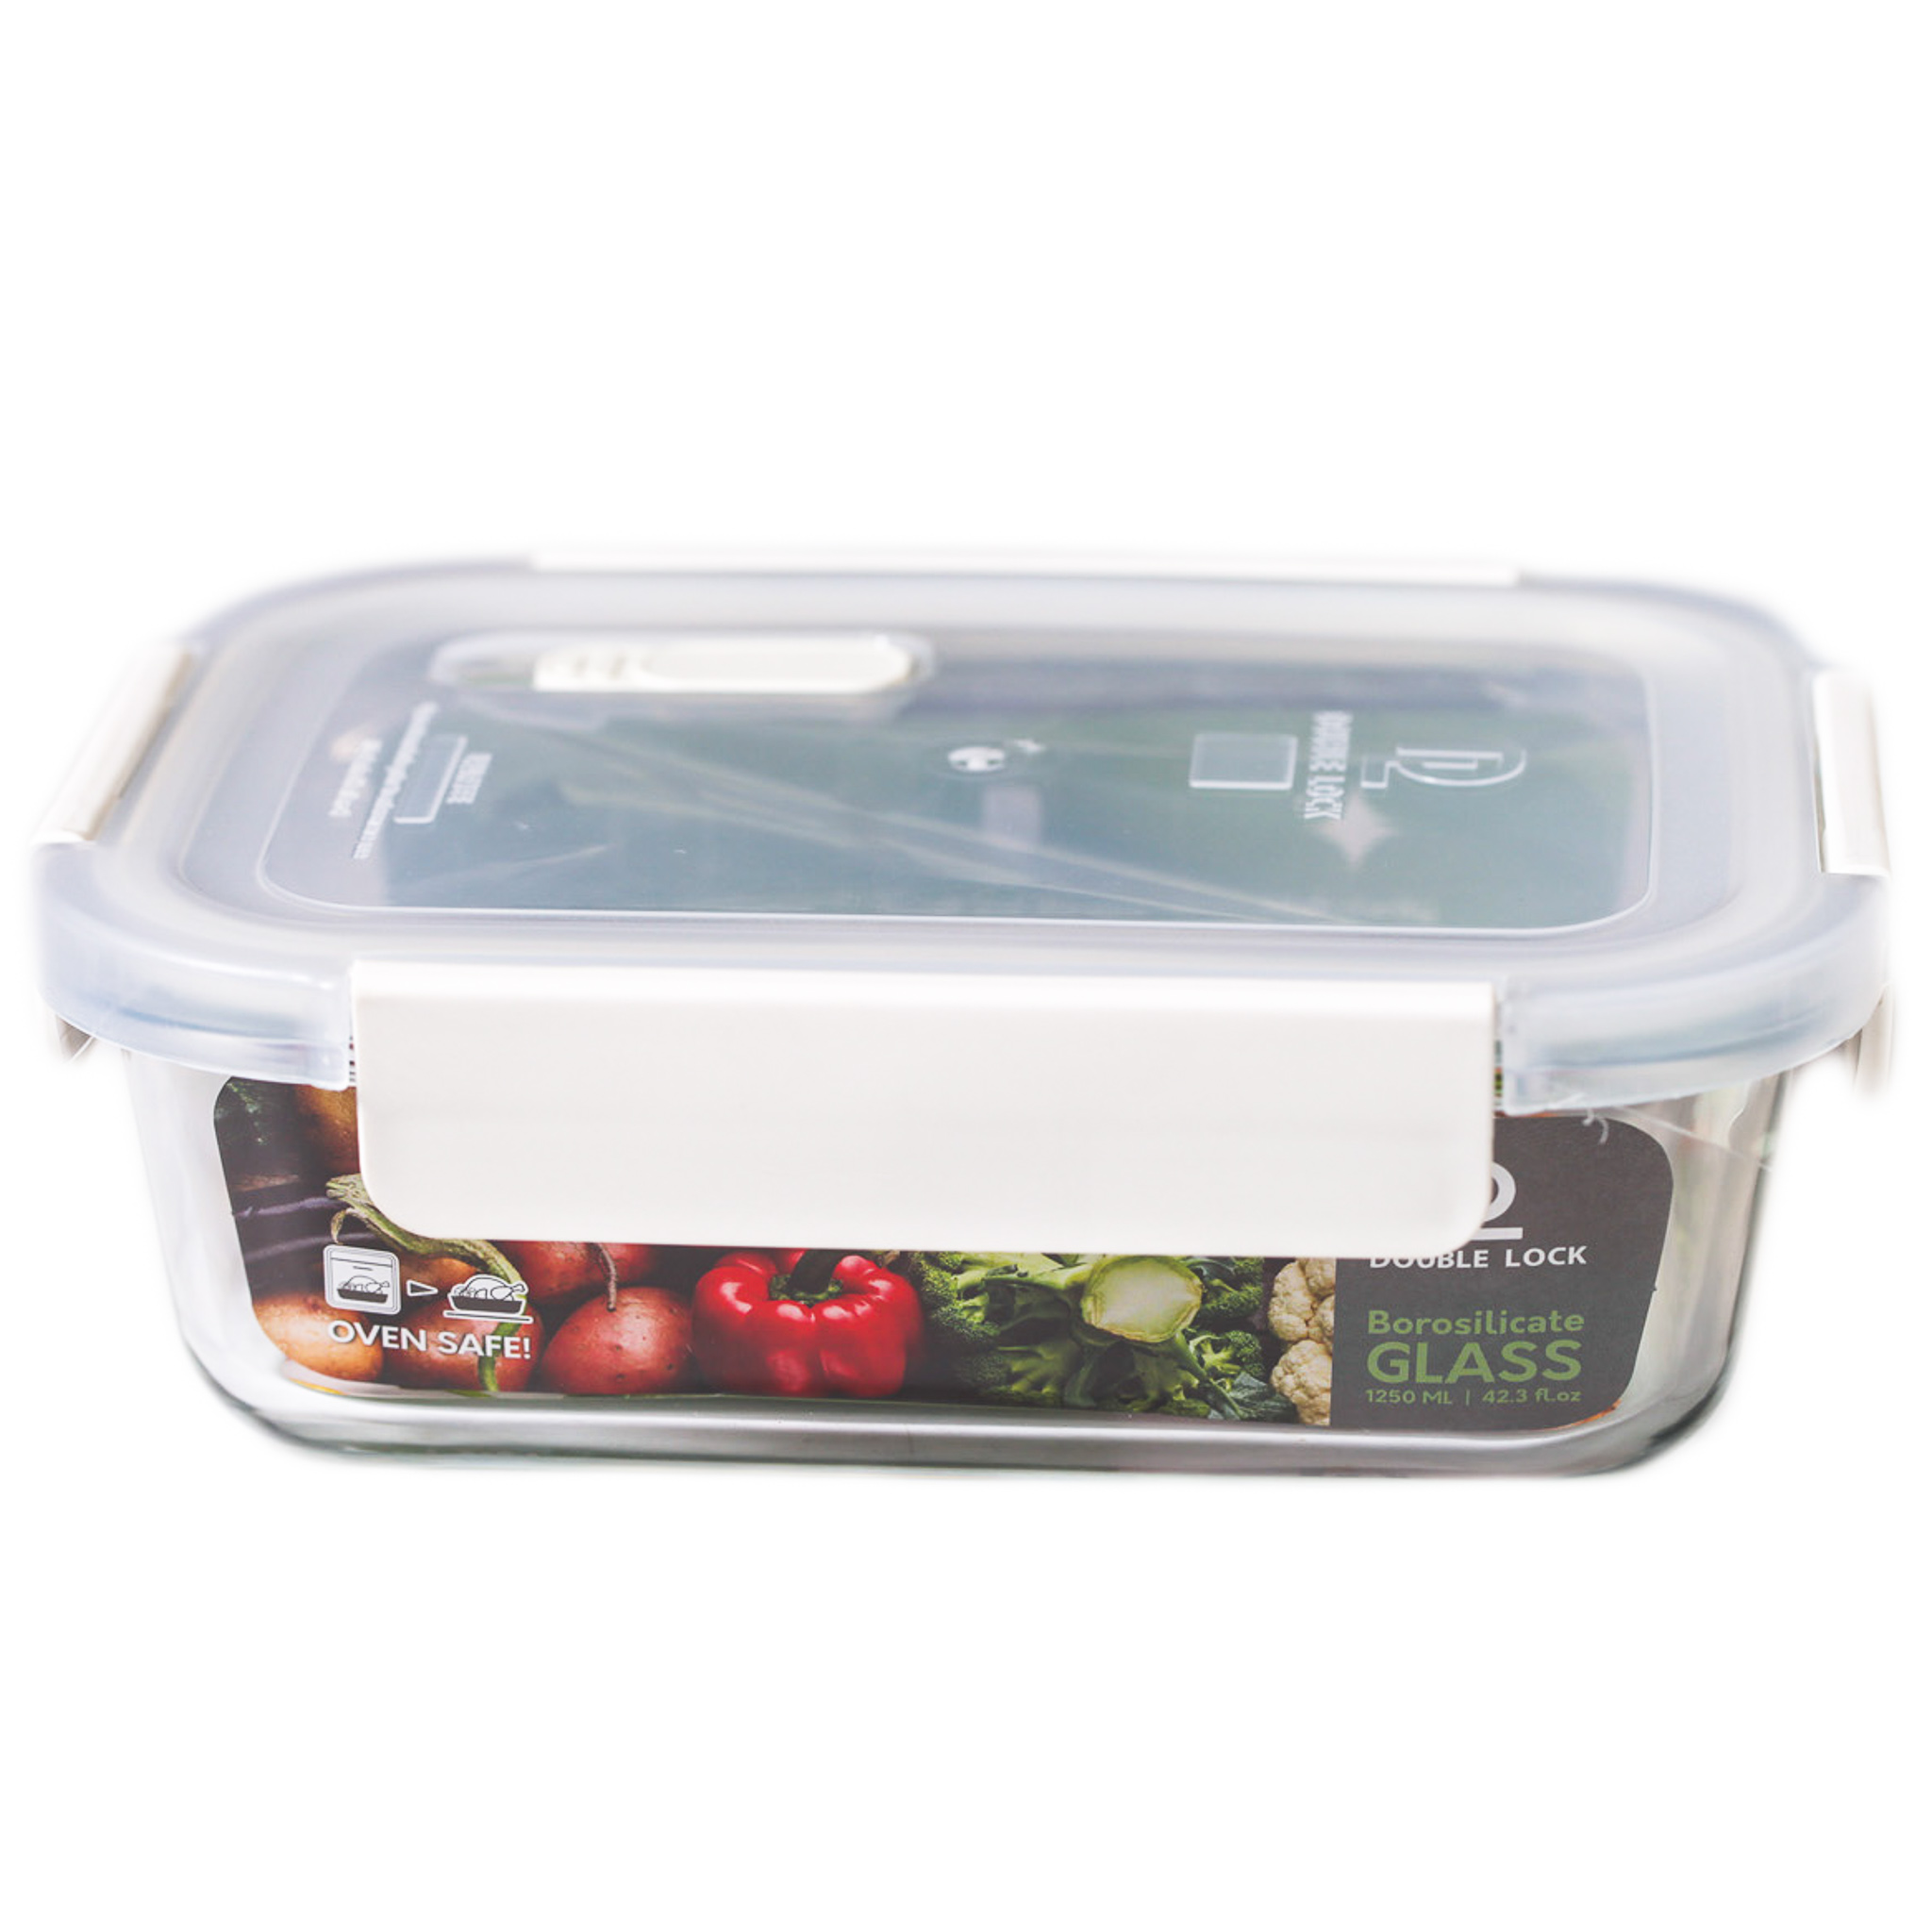 Borosilicate Glass Container (six-pack, 1250ml)